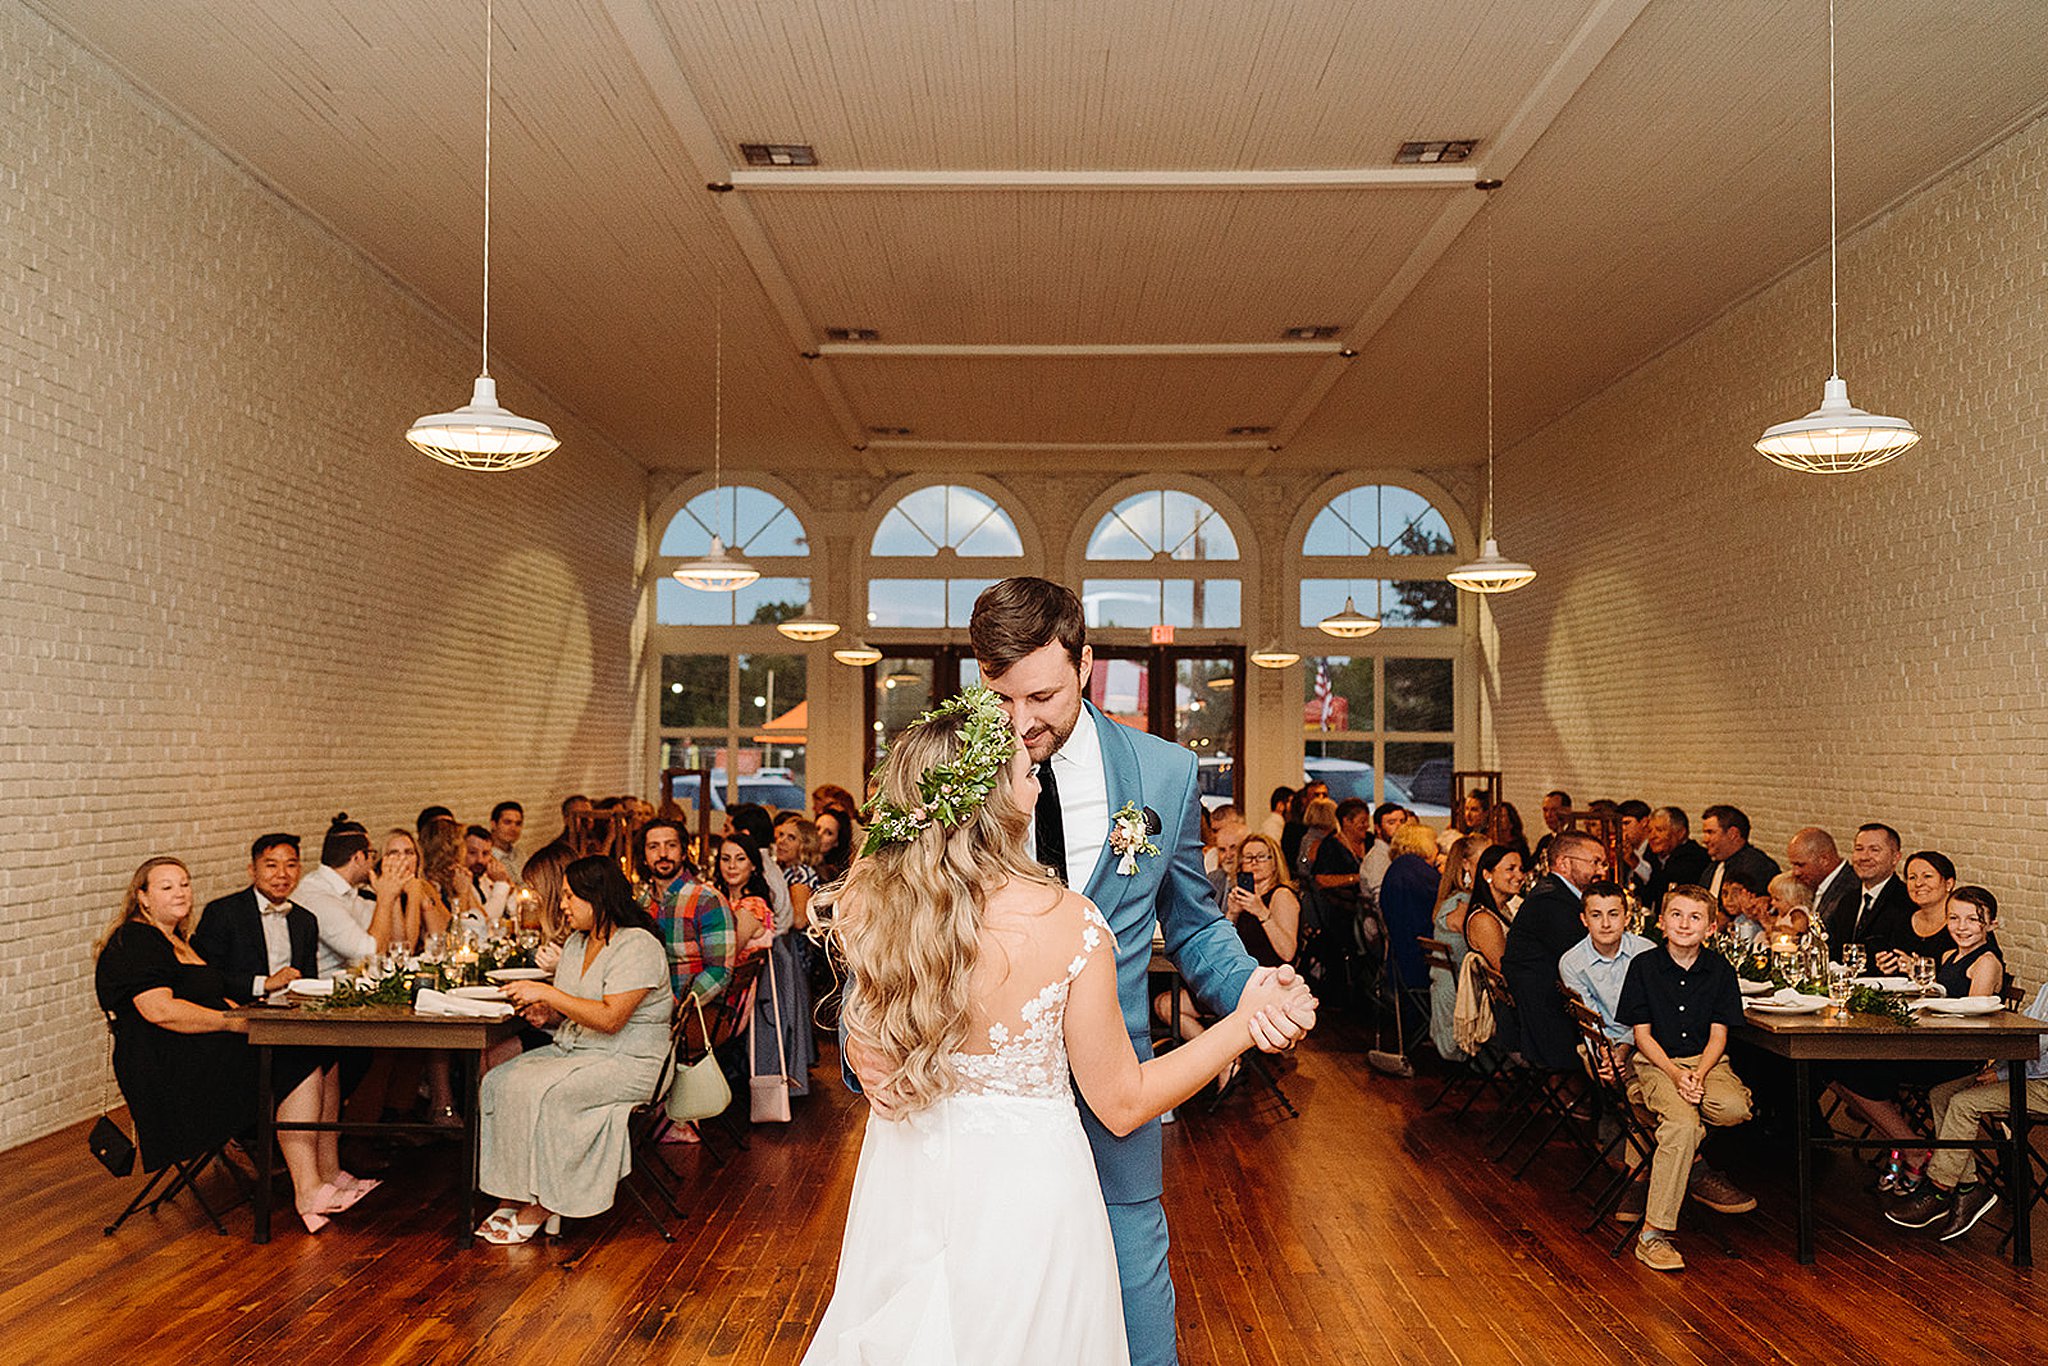 A newlywed couple's first dance in one of the best Austin wedding venues.